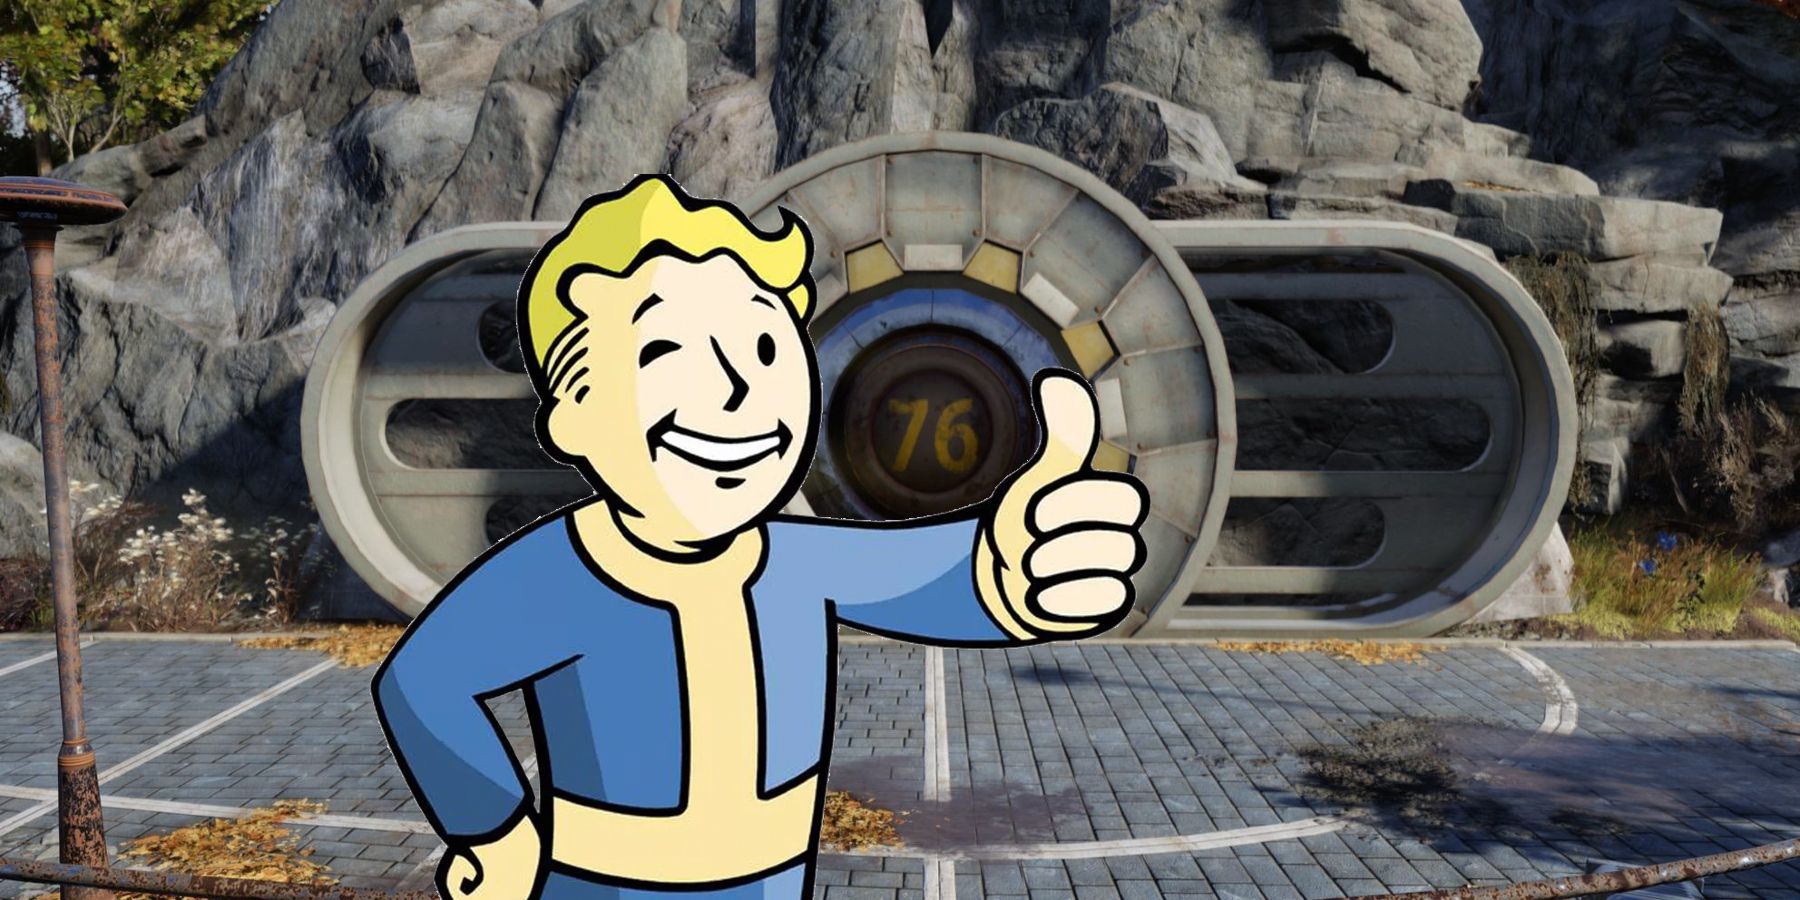 Fallout Every Vault Number In Fallout Canon (So Far)